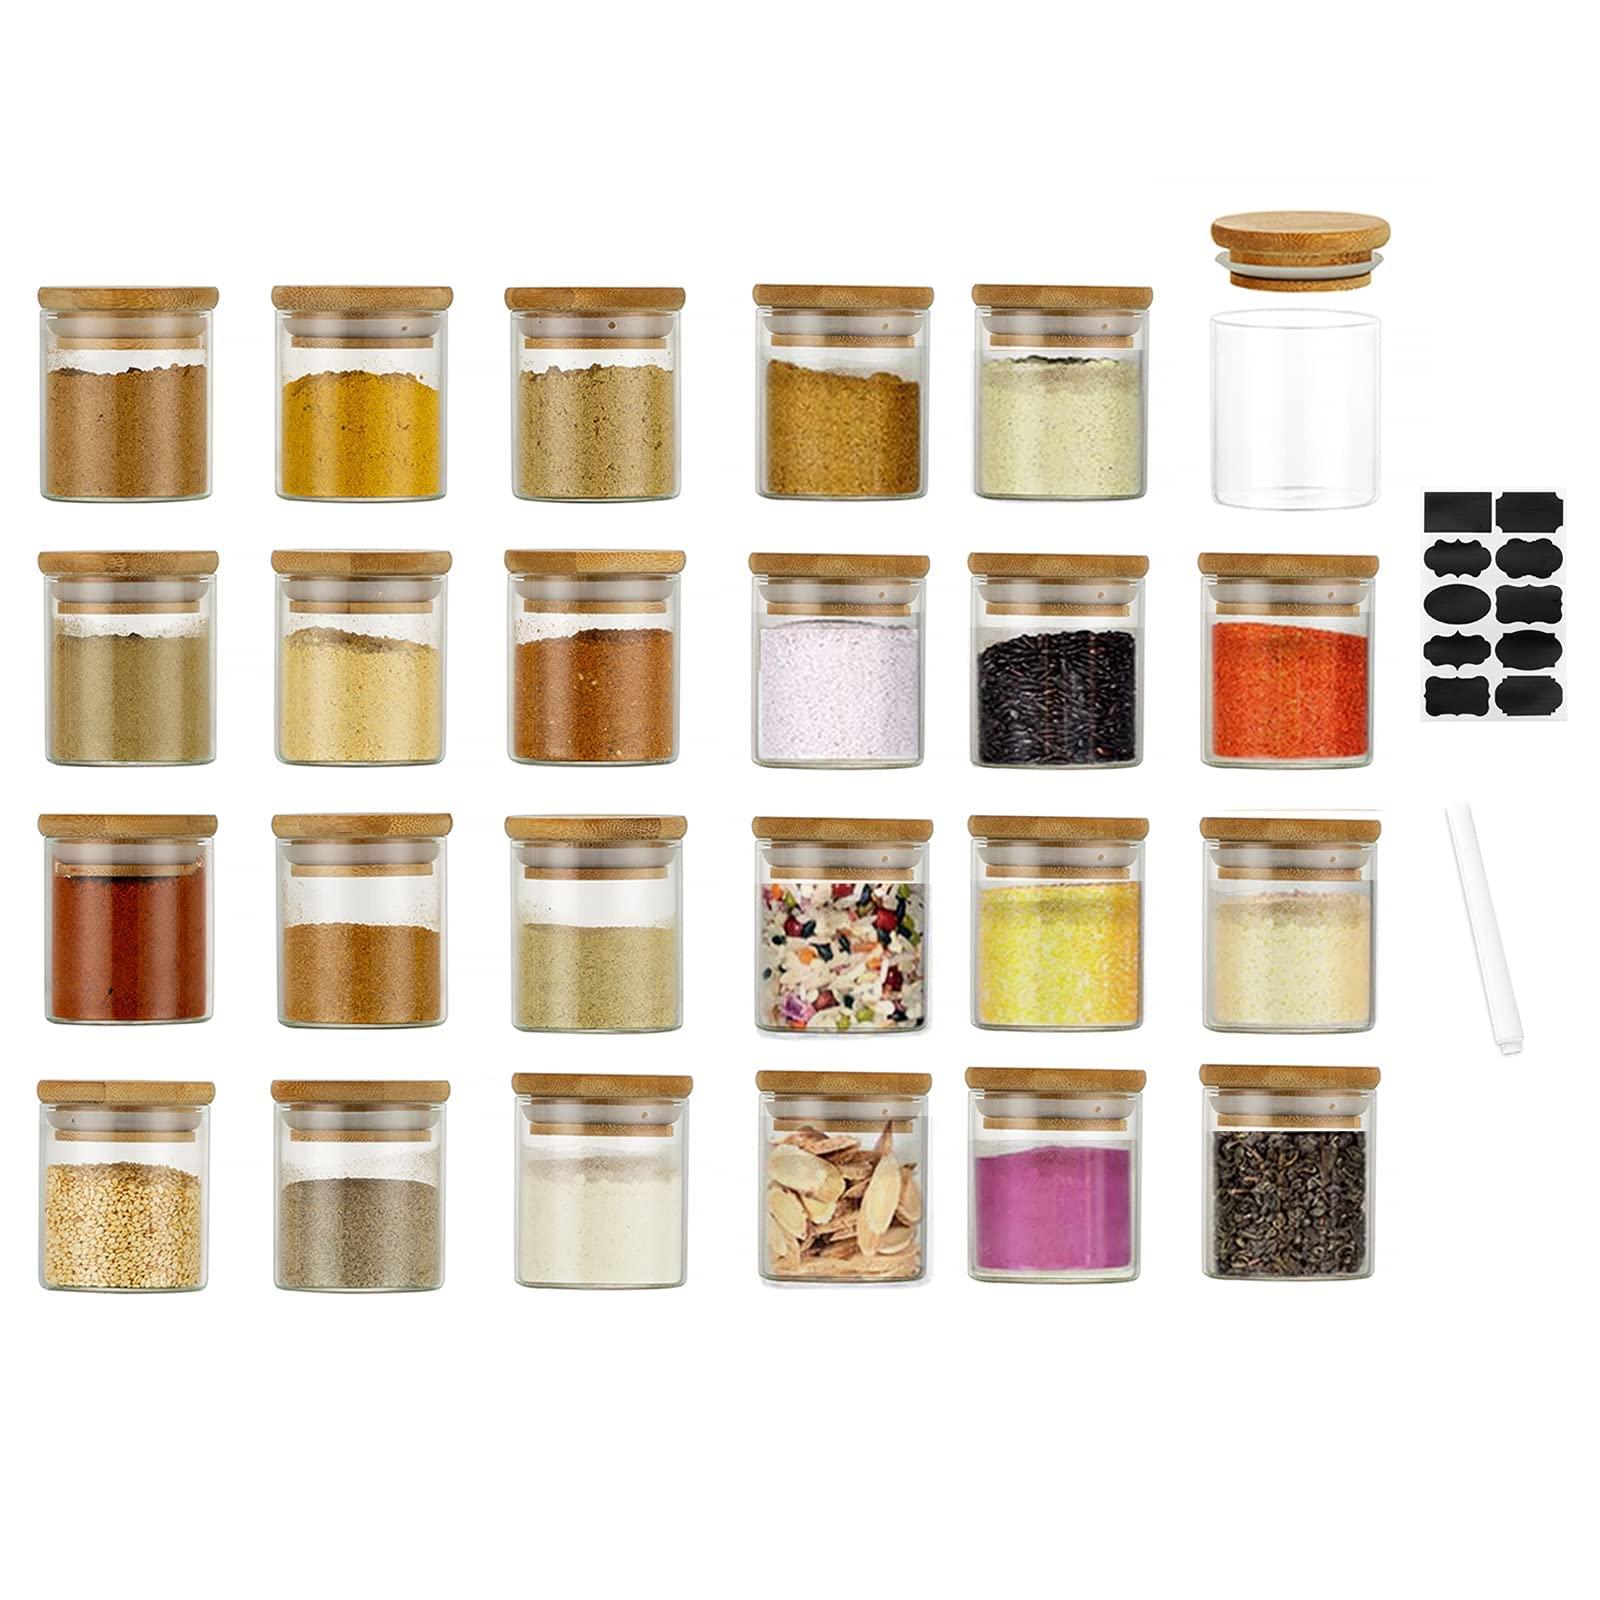 Bamboo Spice Jars Small Glass: 75ML 24Pcs Airtight Food Storage Jars with Lids and Labels Smell Proof Container for Kitchen Organization Preserving Sweet Cookie Biscuit Tea Coffee Snack Salt Sugar